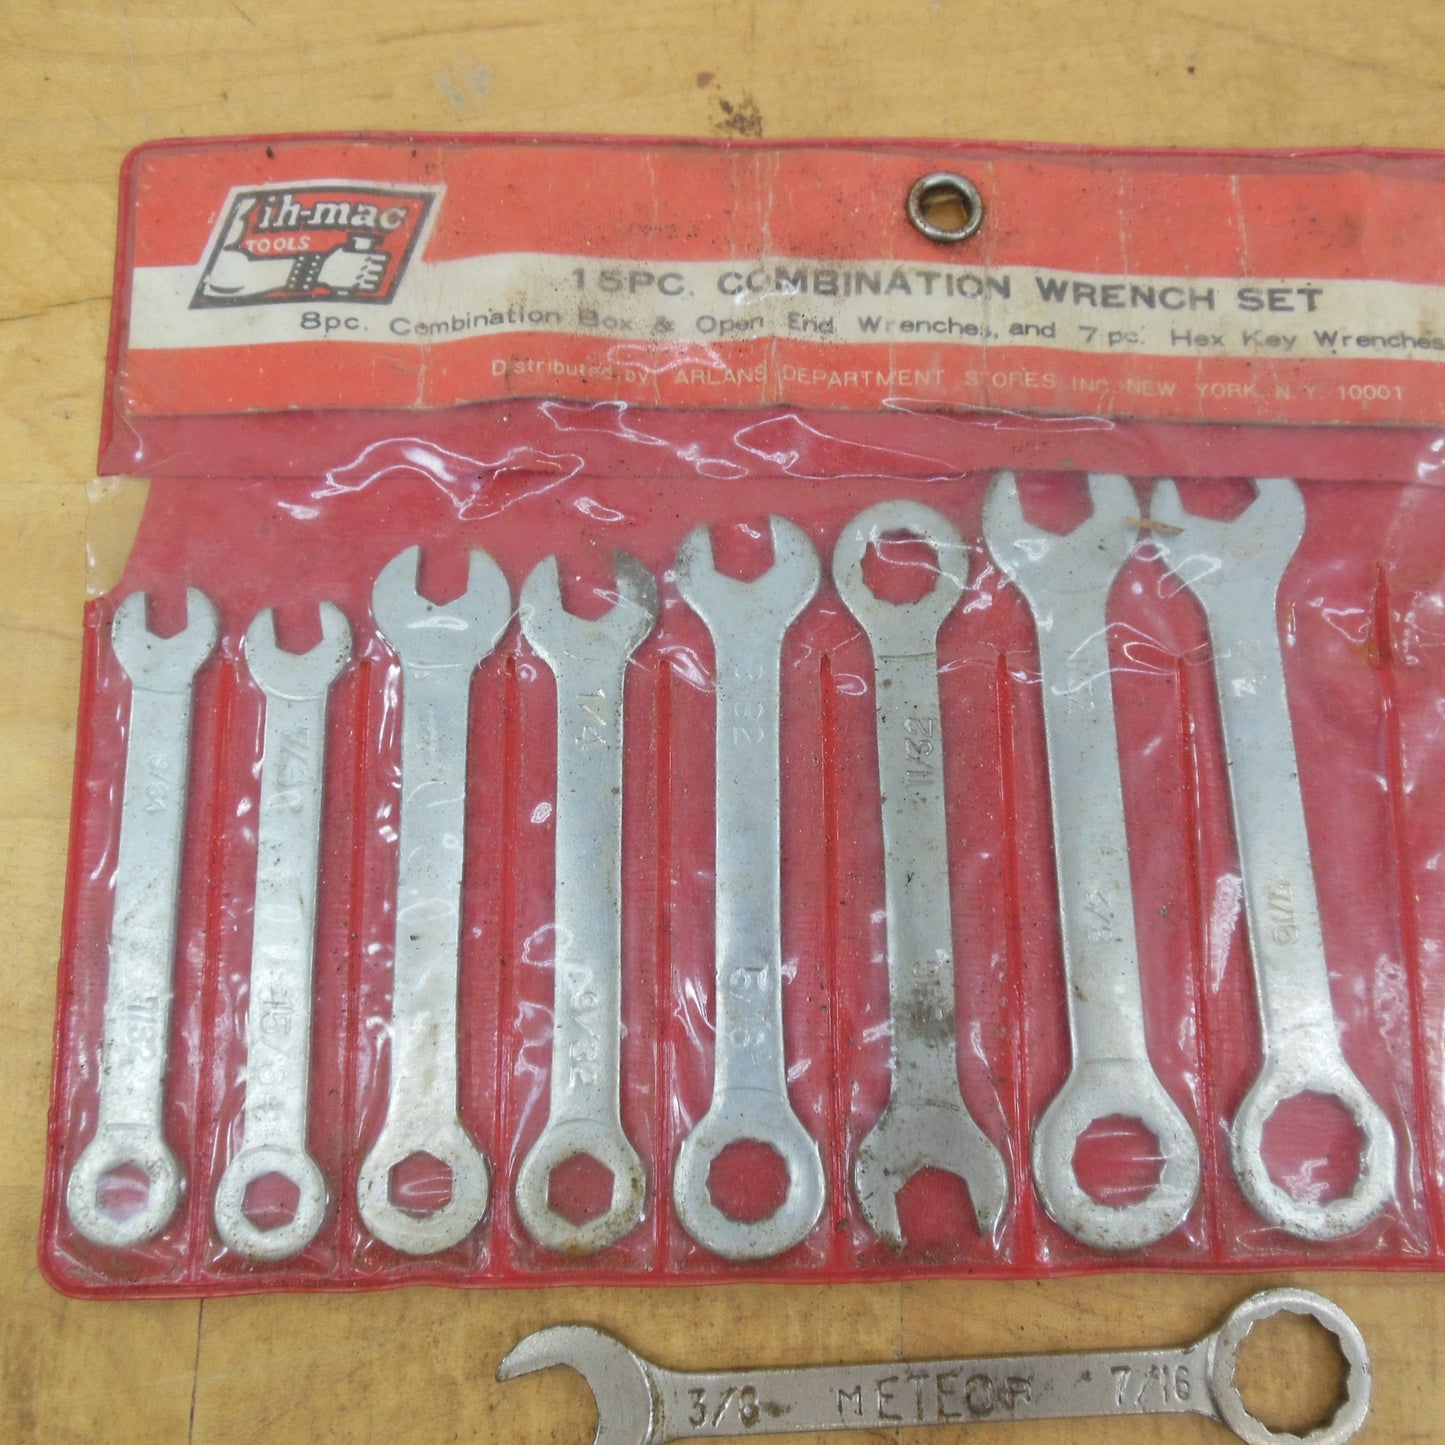 Meteor & ih-mac Small Combo Wrench Sets 15 Pieces Used